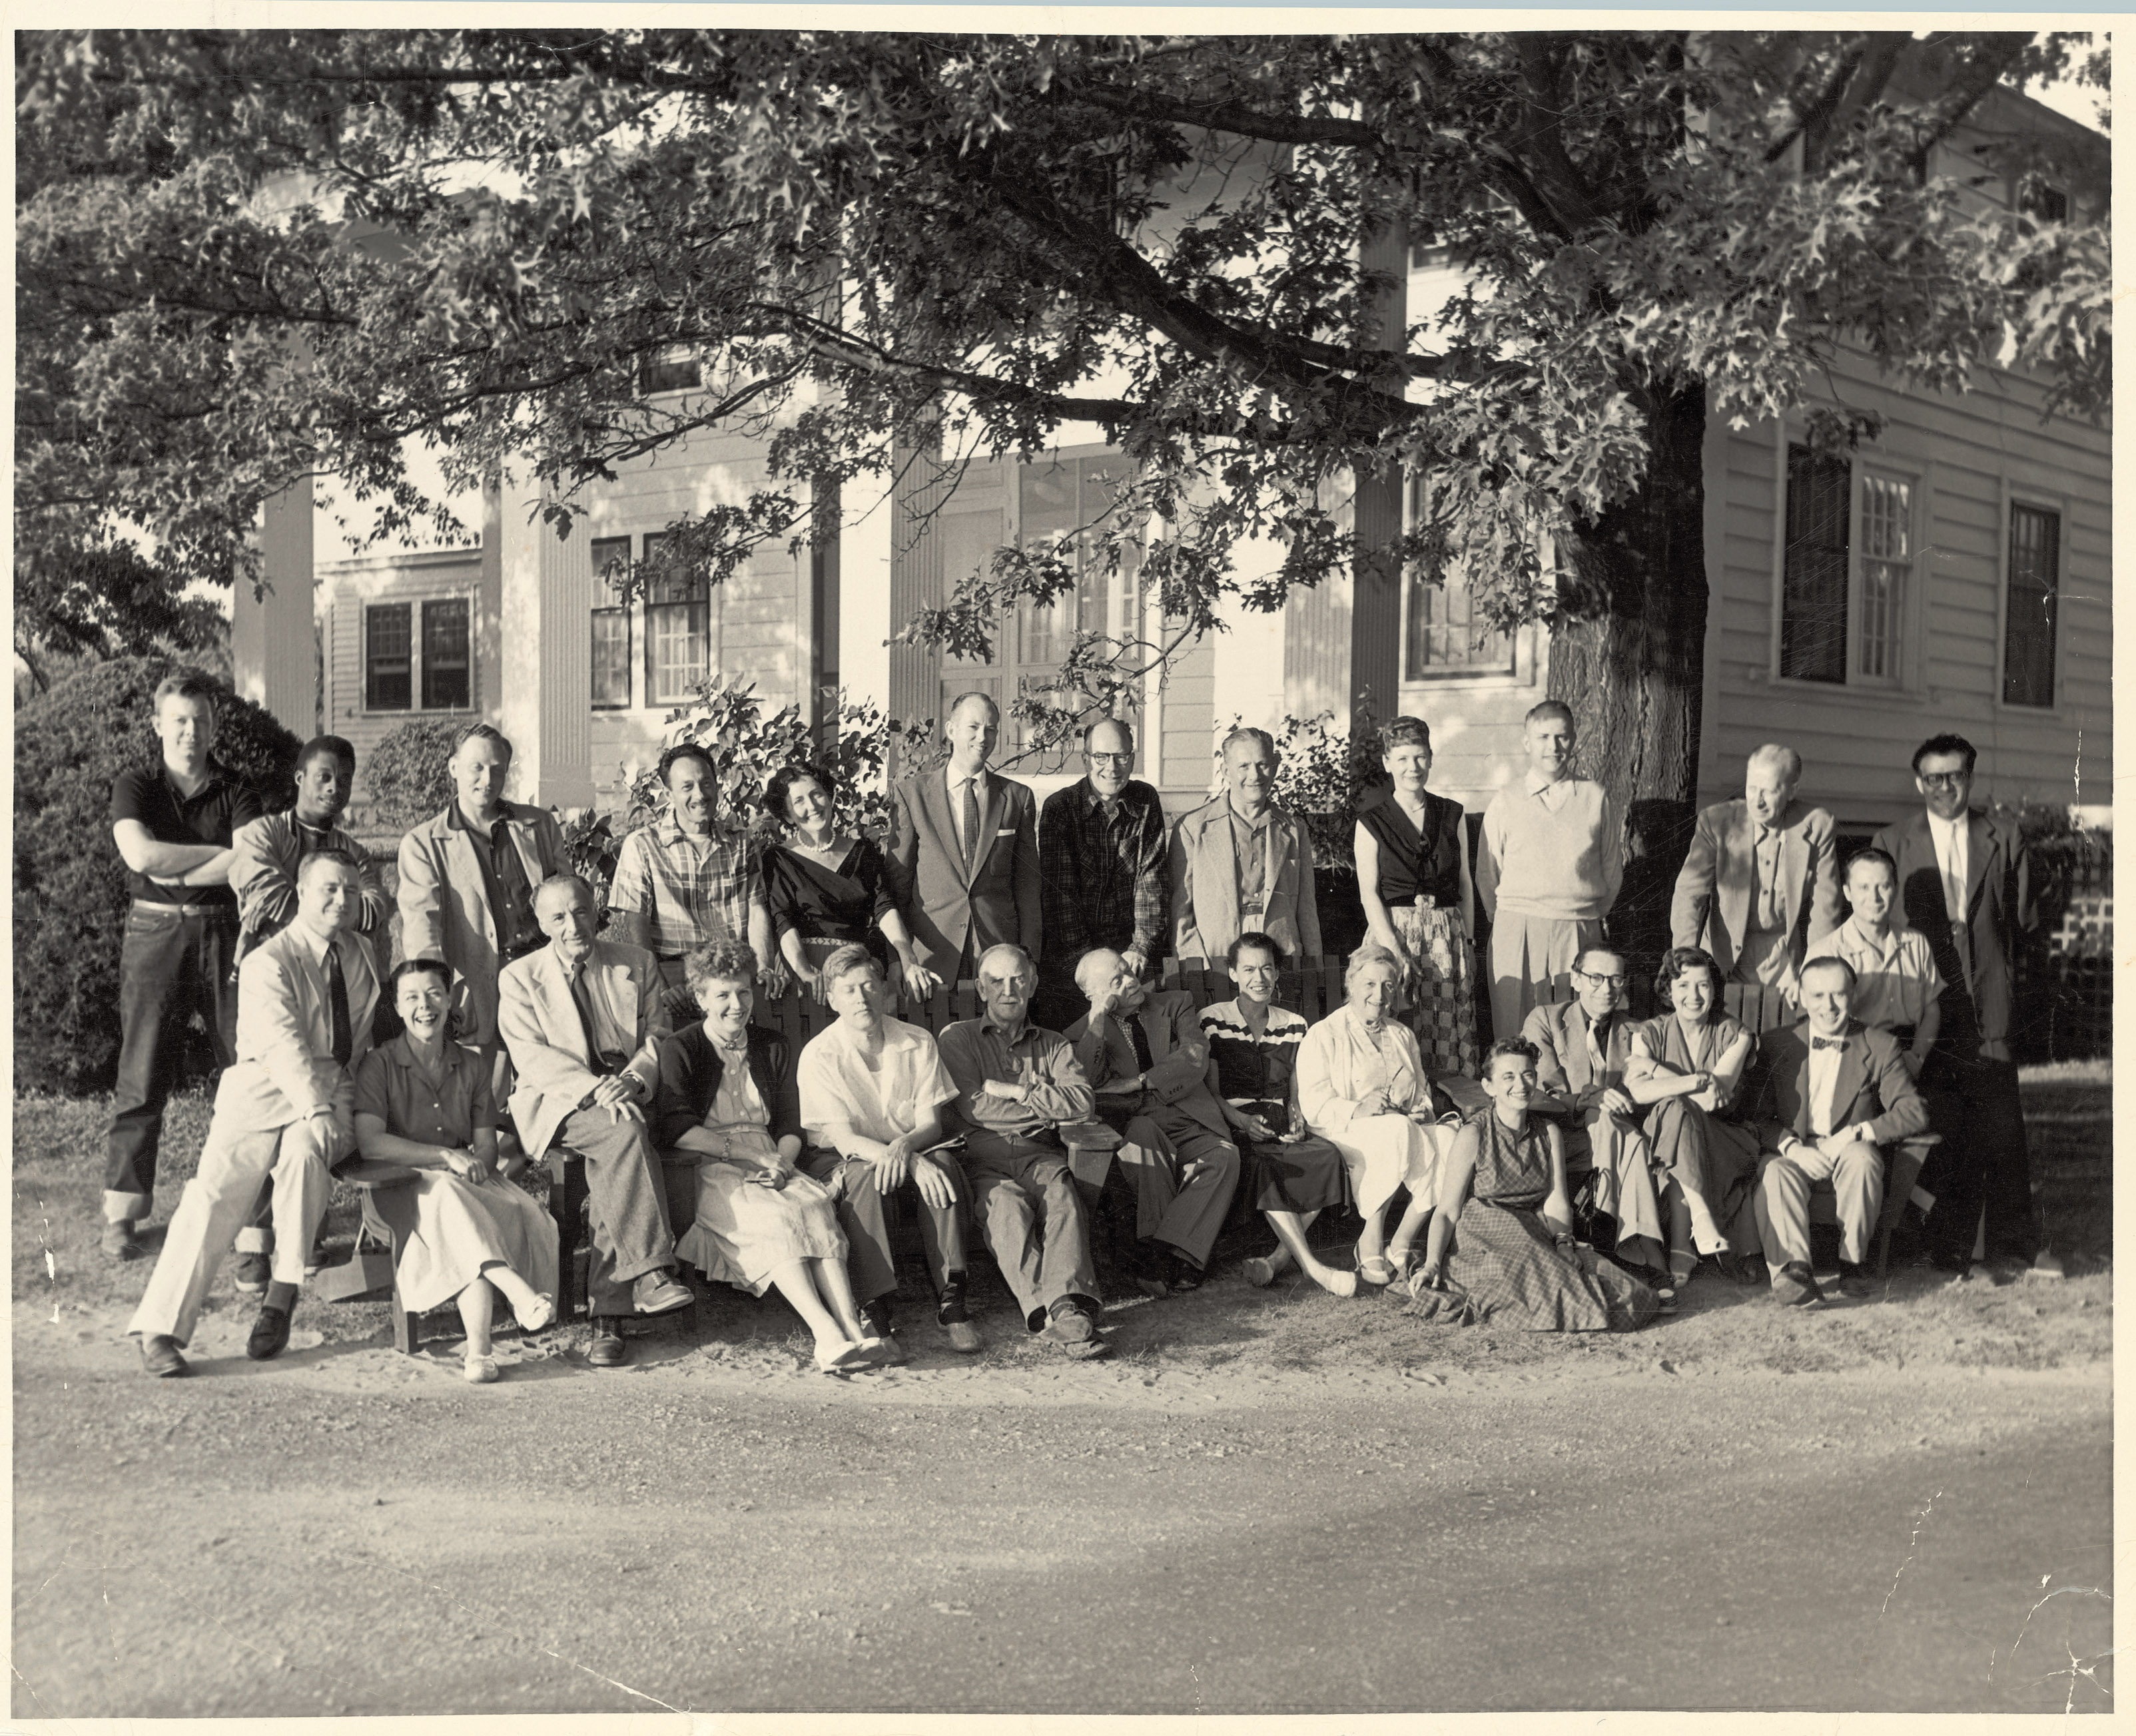 Old photo of the MacDowell Colony